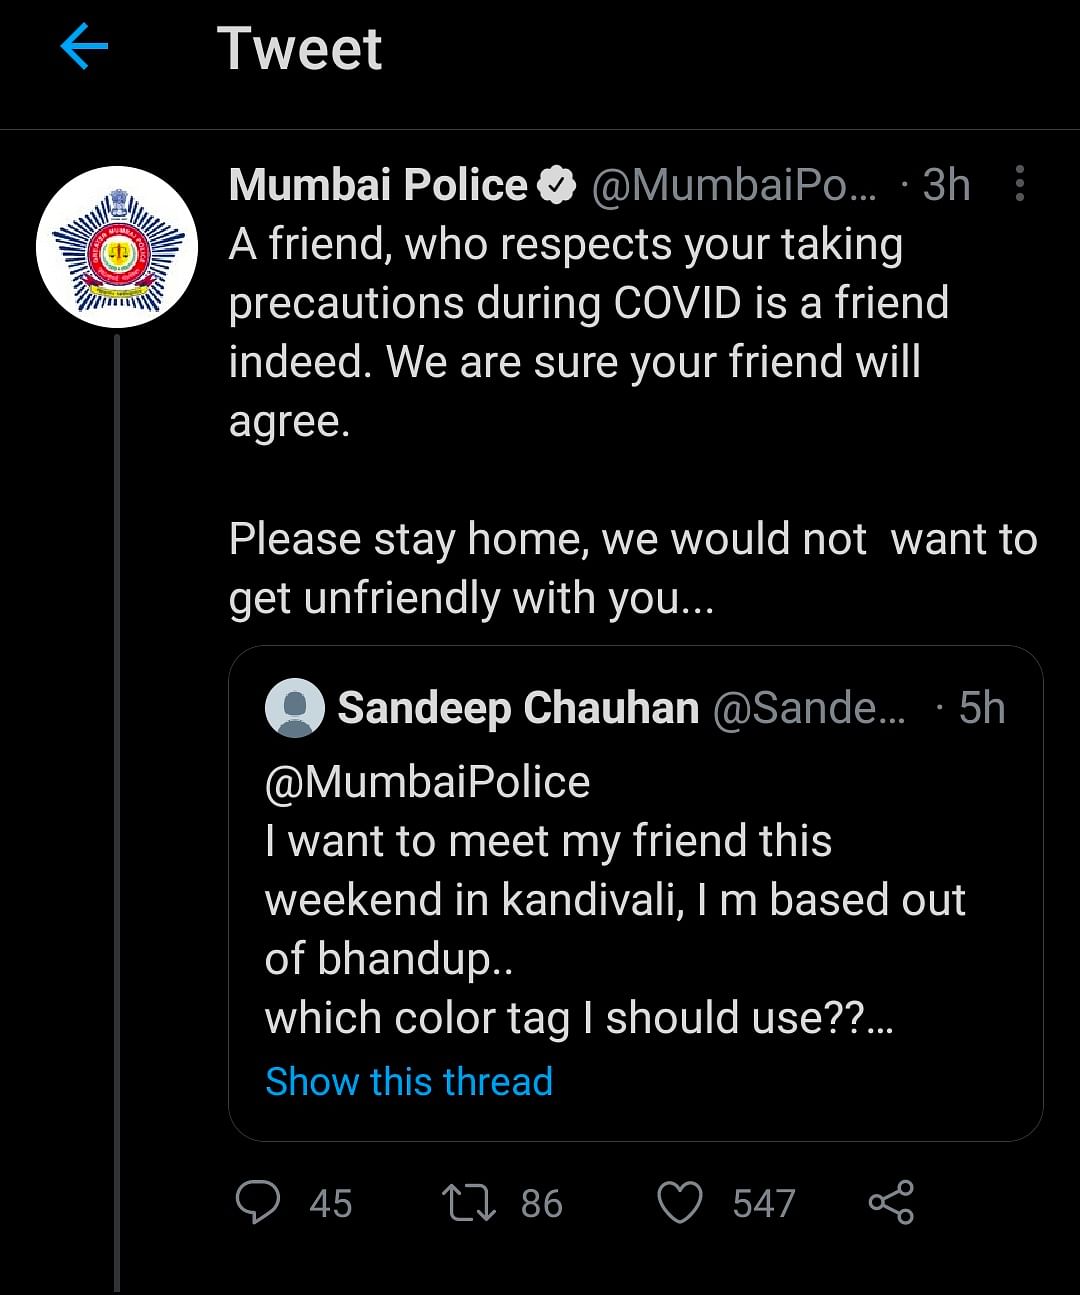 How is Mumbai Police and its "Twitter Madam" dealing with the outlandishness of recent times?